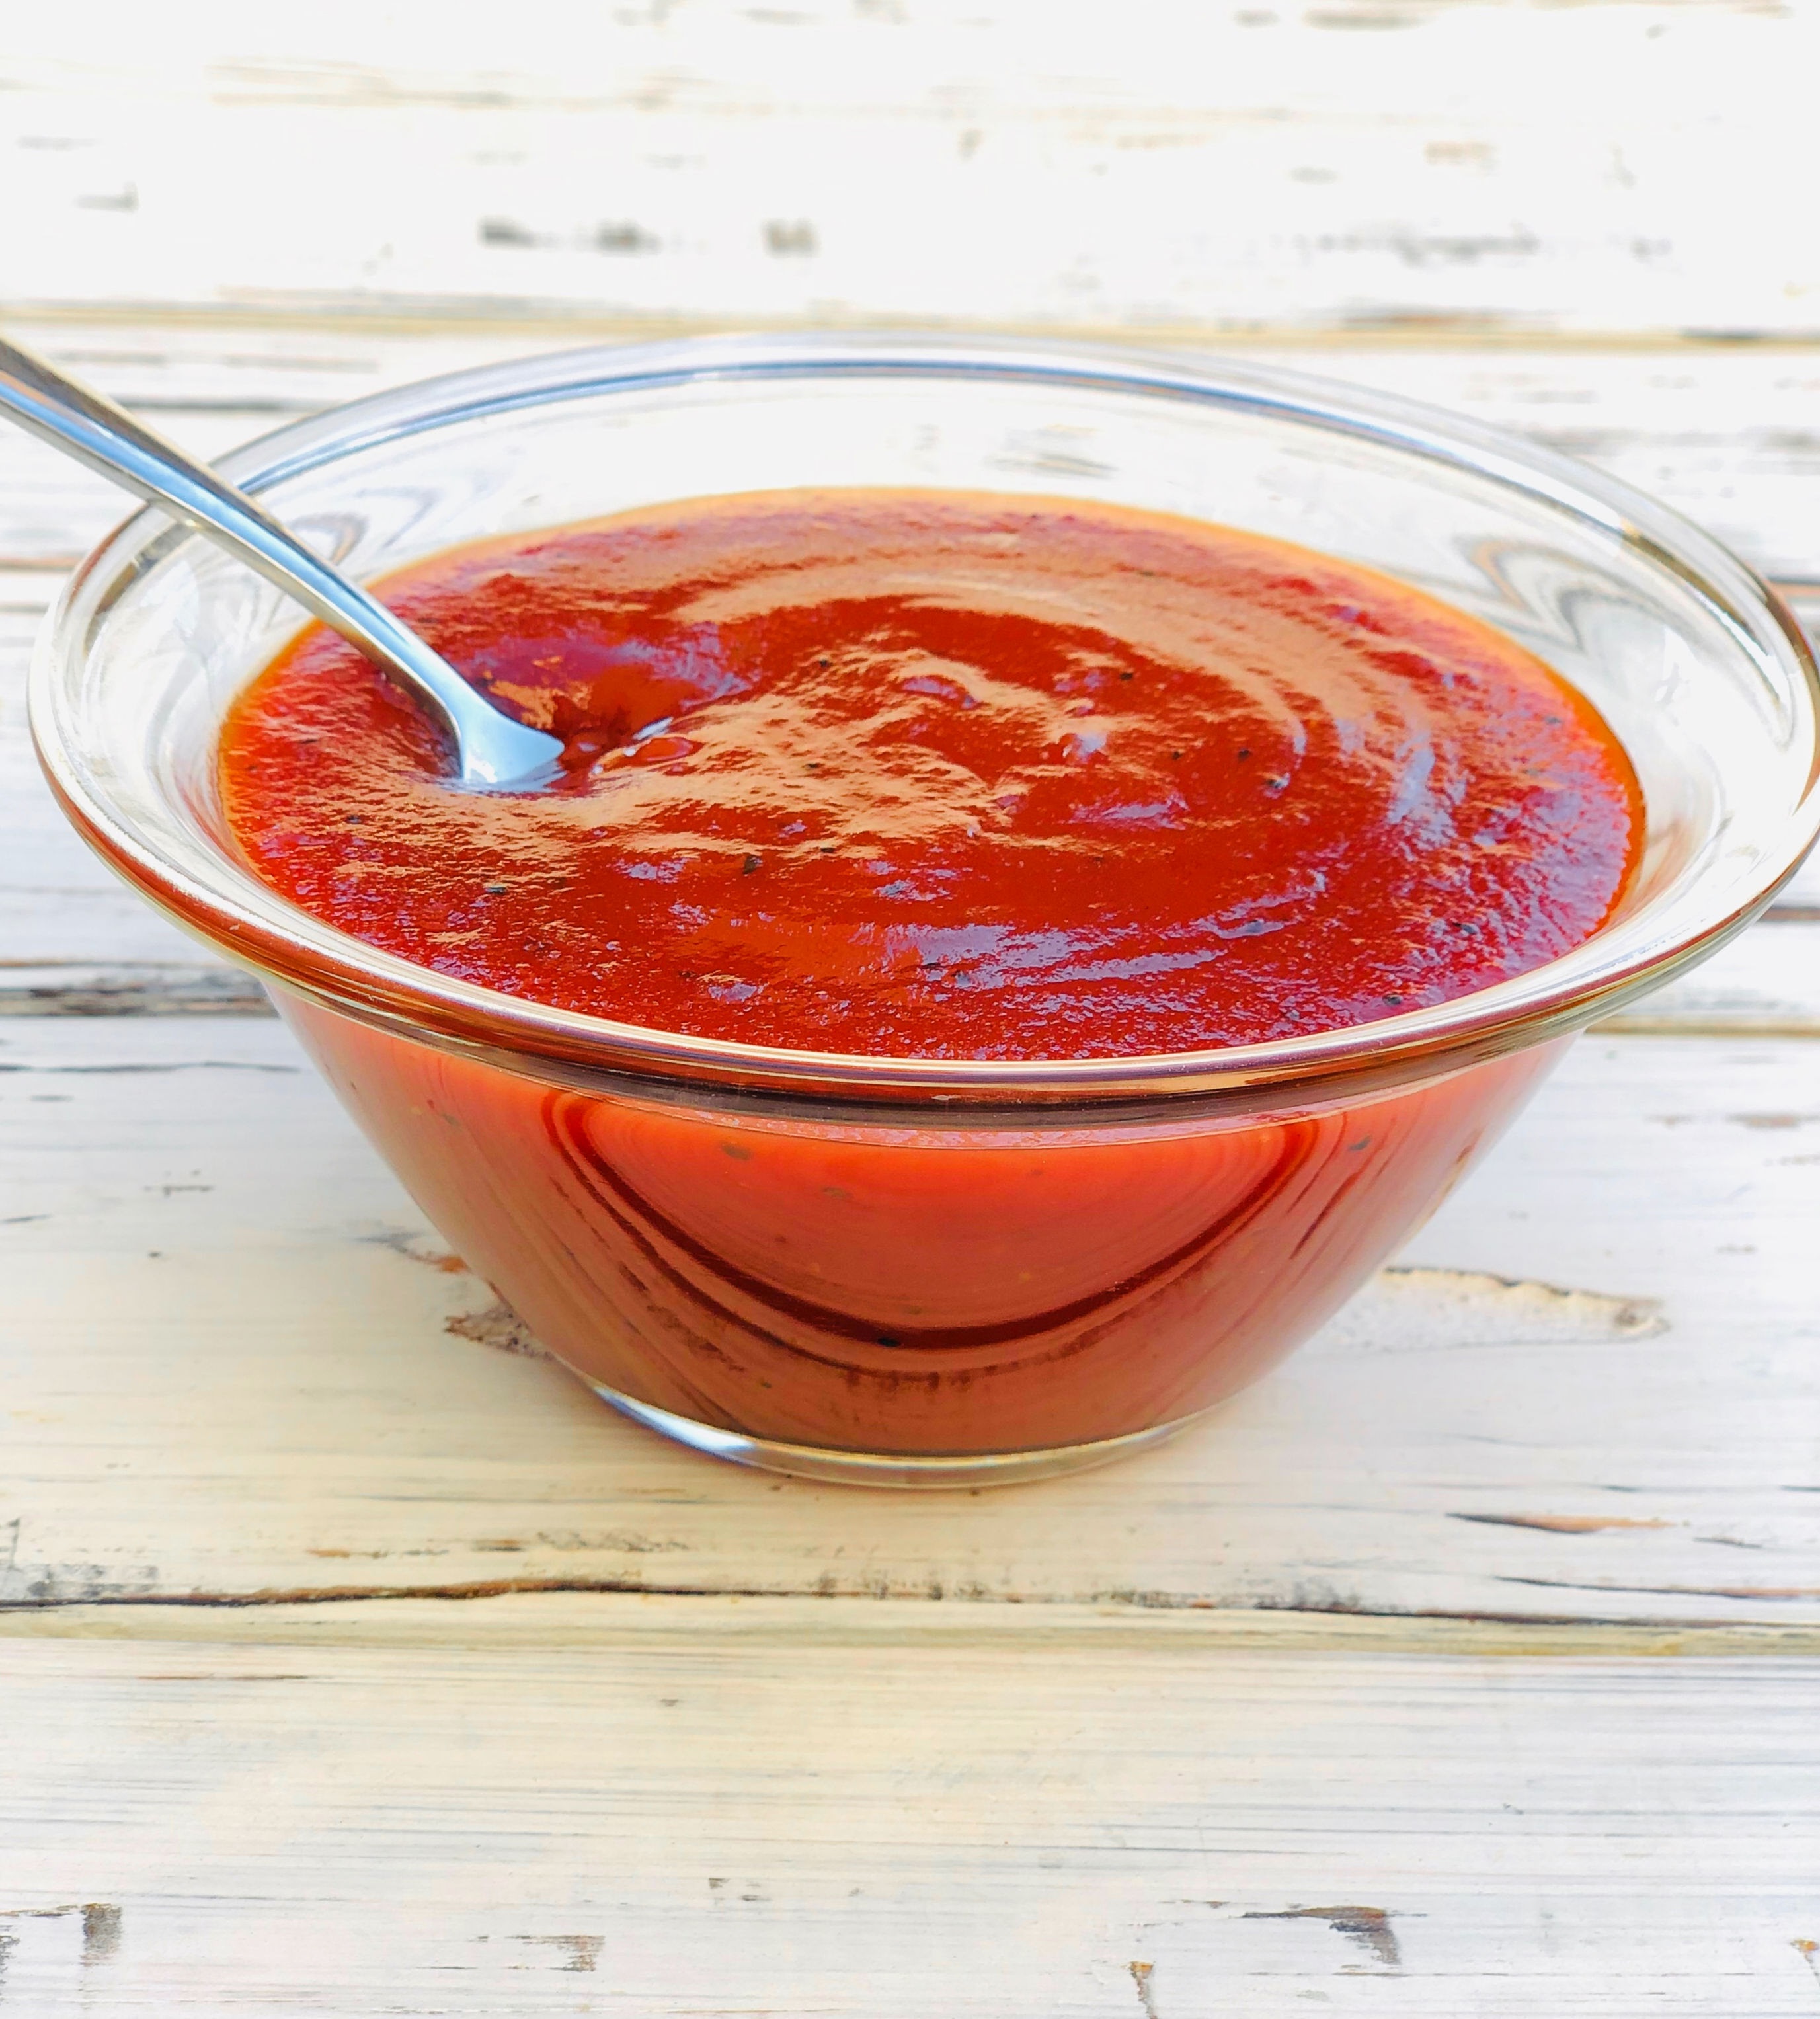 Carolina Style Bbq Sauce Recipe This Wife Cooks,Turkey Injections